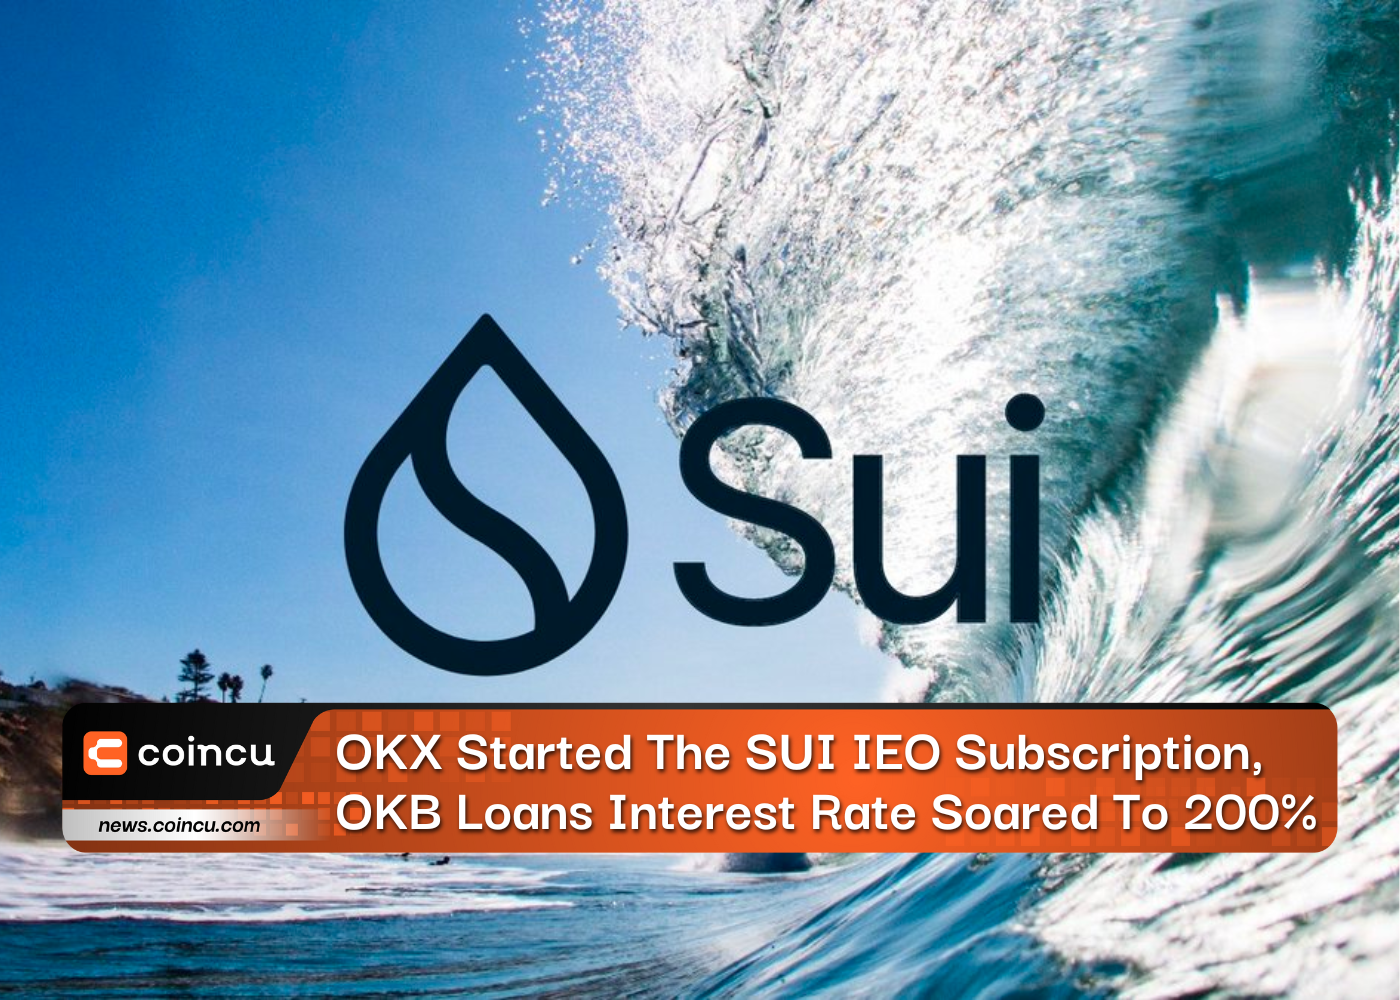 OKX Started The SUI IEO Subscription, OKB Loans Interest Rate Soared To 200%